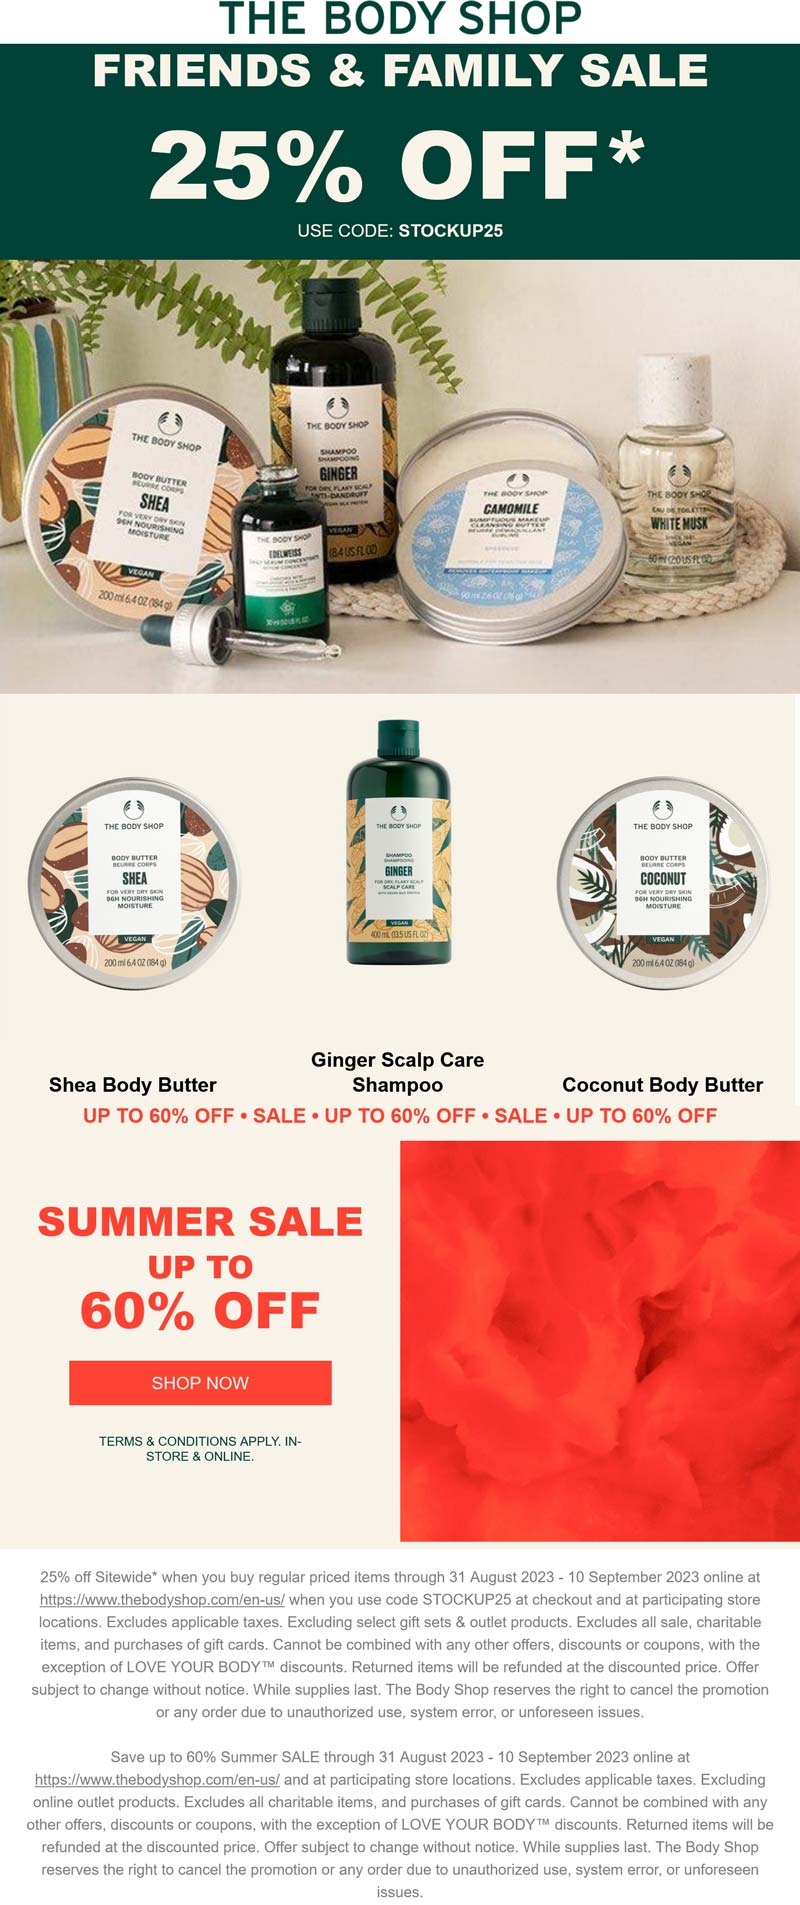 The Body Shop stores Coupon  25% off everything at The Body Shop via promo code STOCKUP25 #thebodyshop 